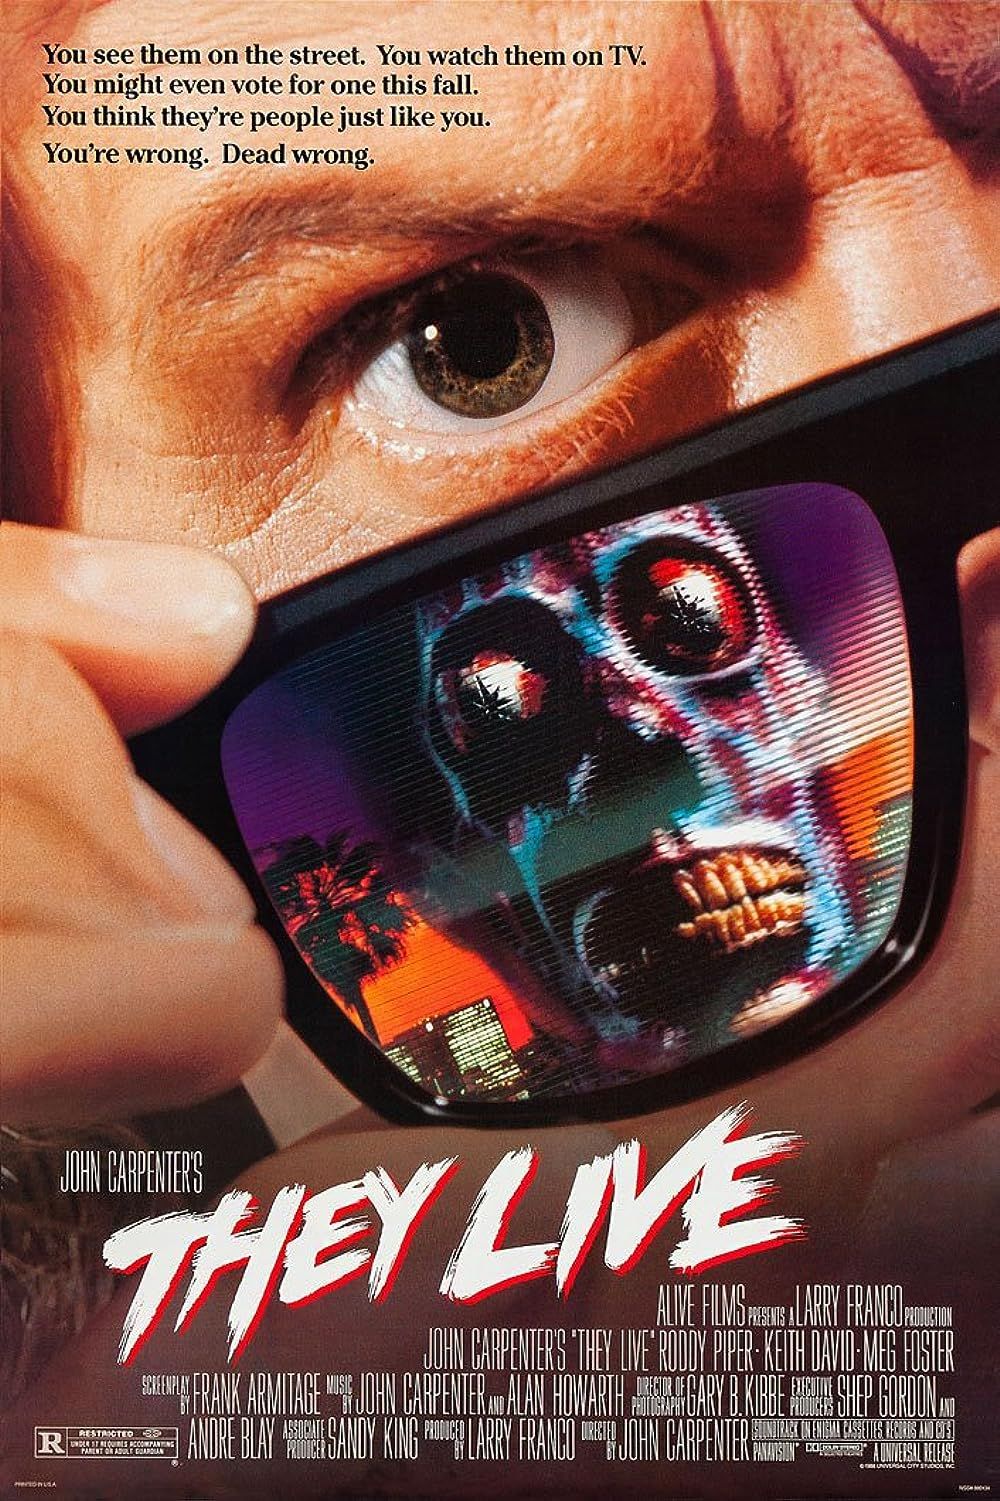 Jeff Imada and Roddy Piper in They Live movie poster